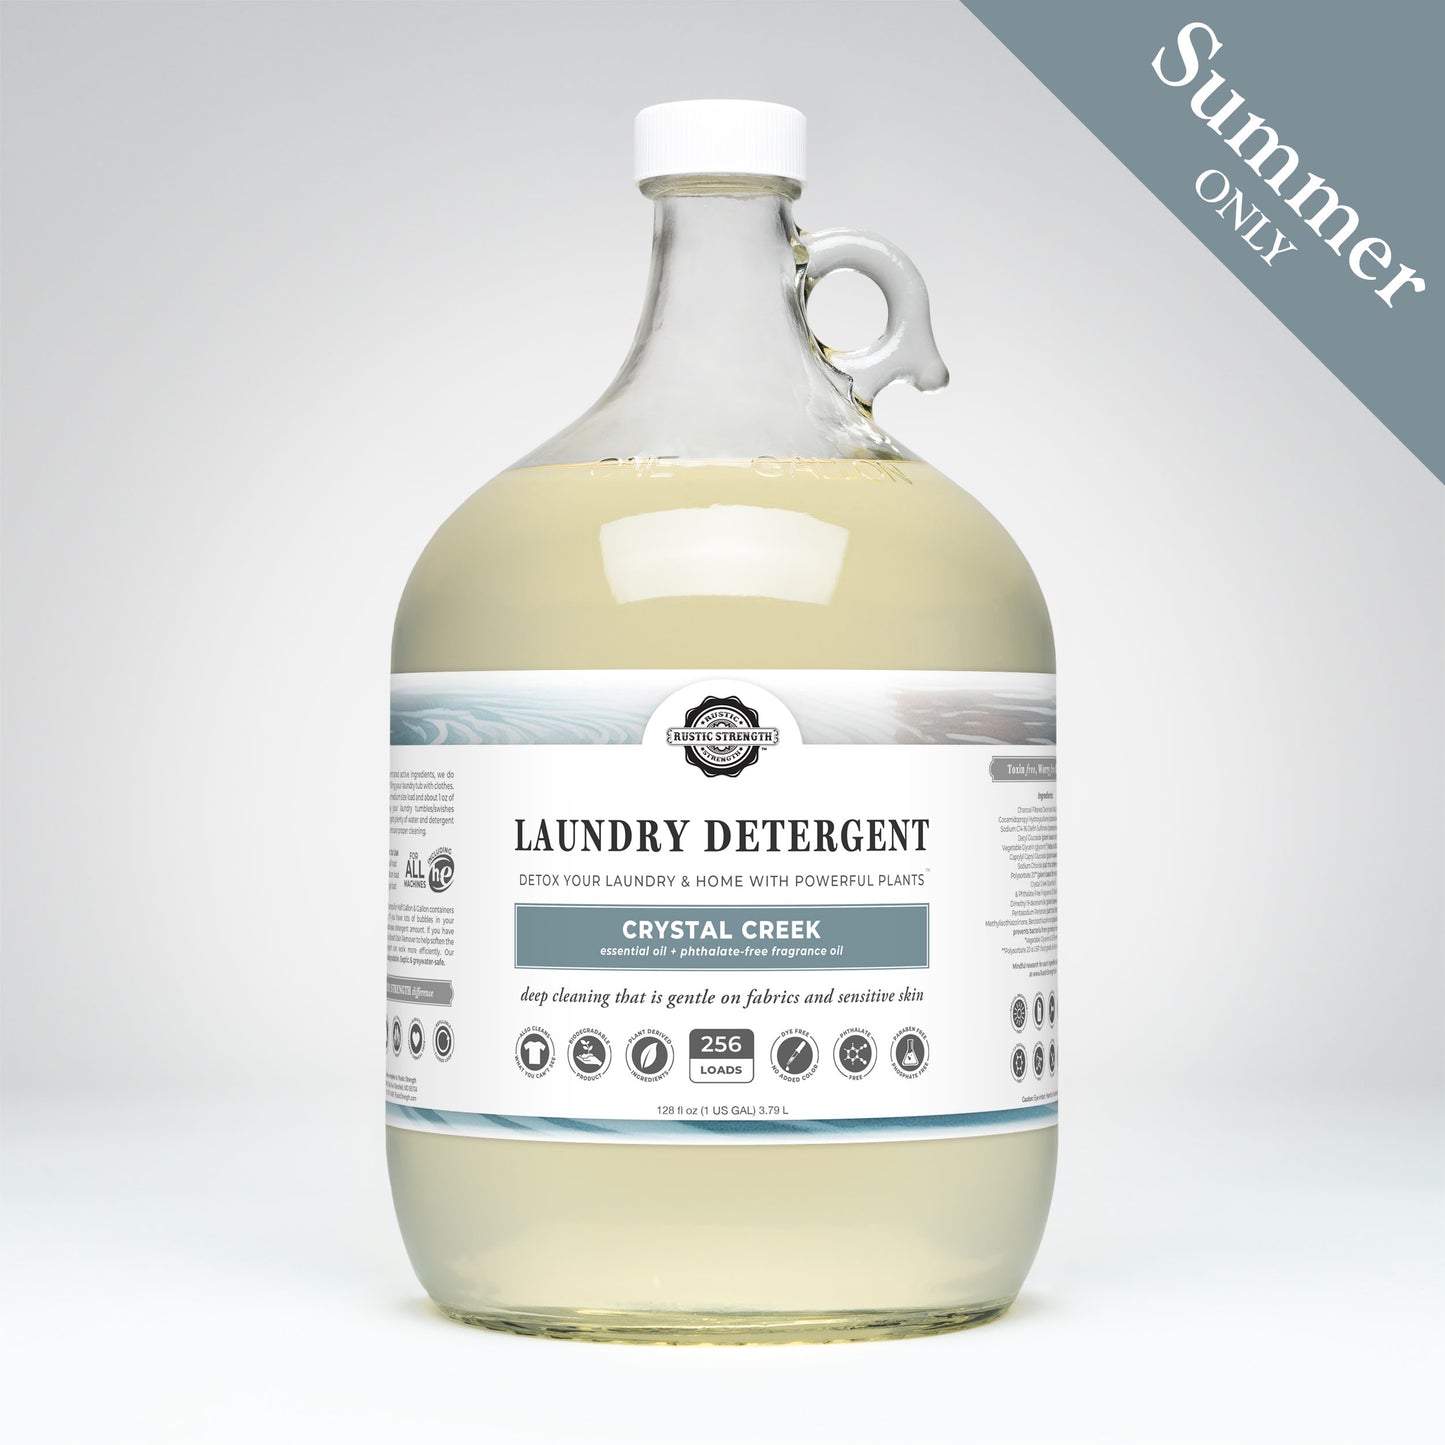 Laundry Detergent - Summer Scents